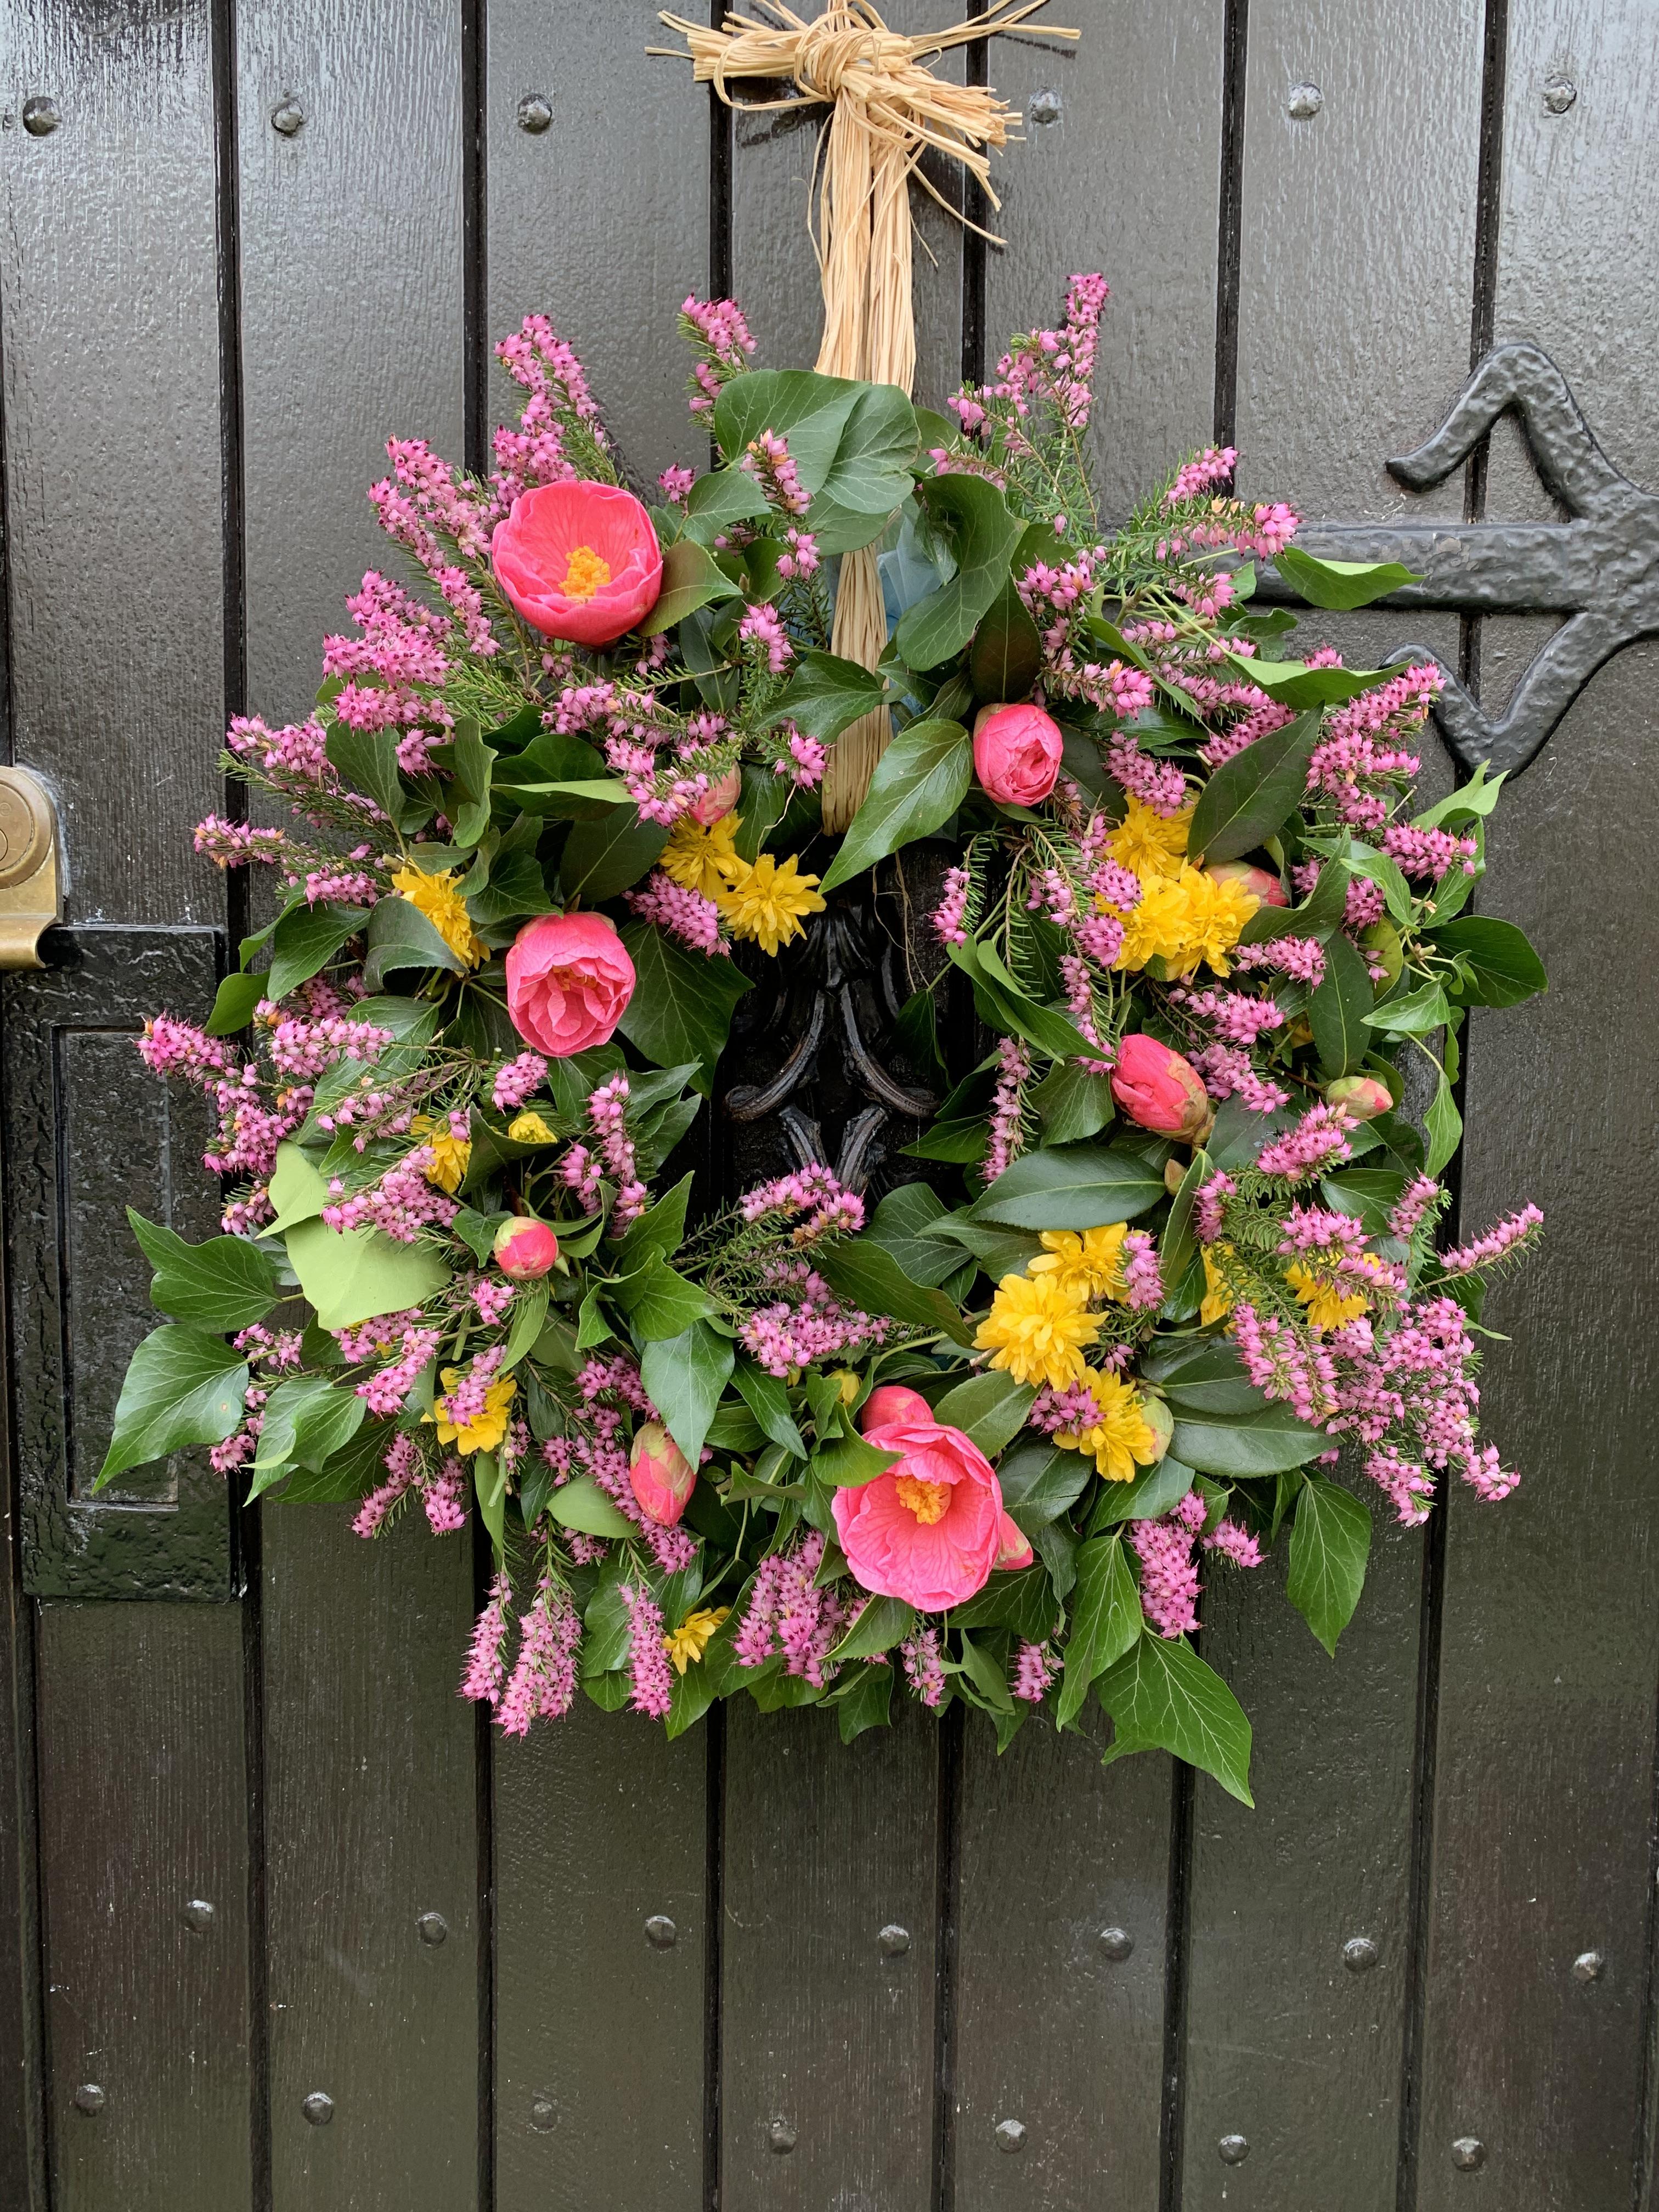 Spring Wreath Workshop at Old Timbers Blackstone, BN5 9TE - Saturday May 11th from 10-12 pm